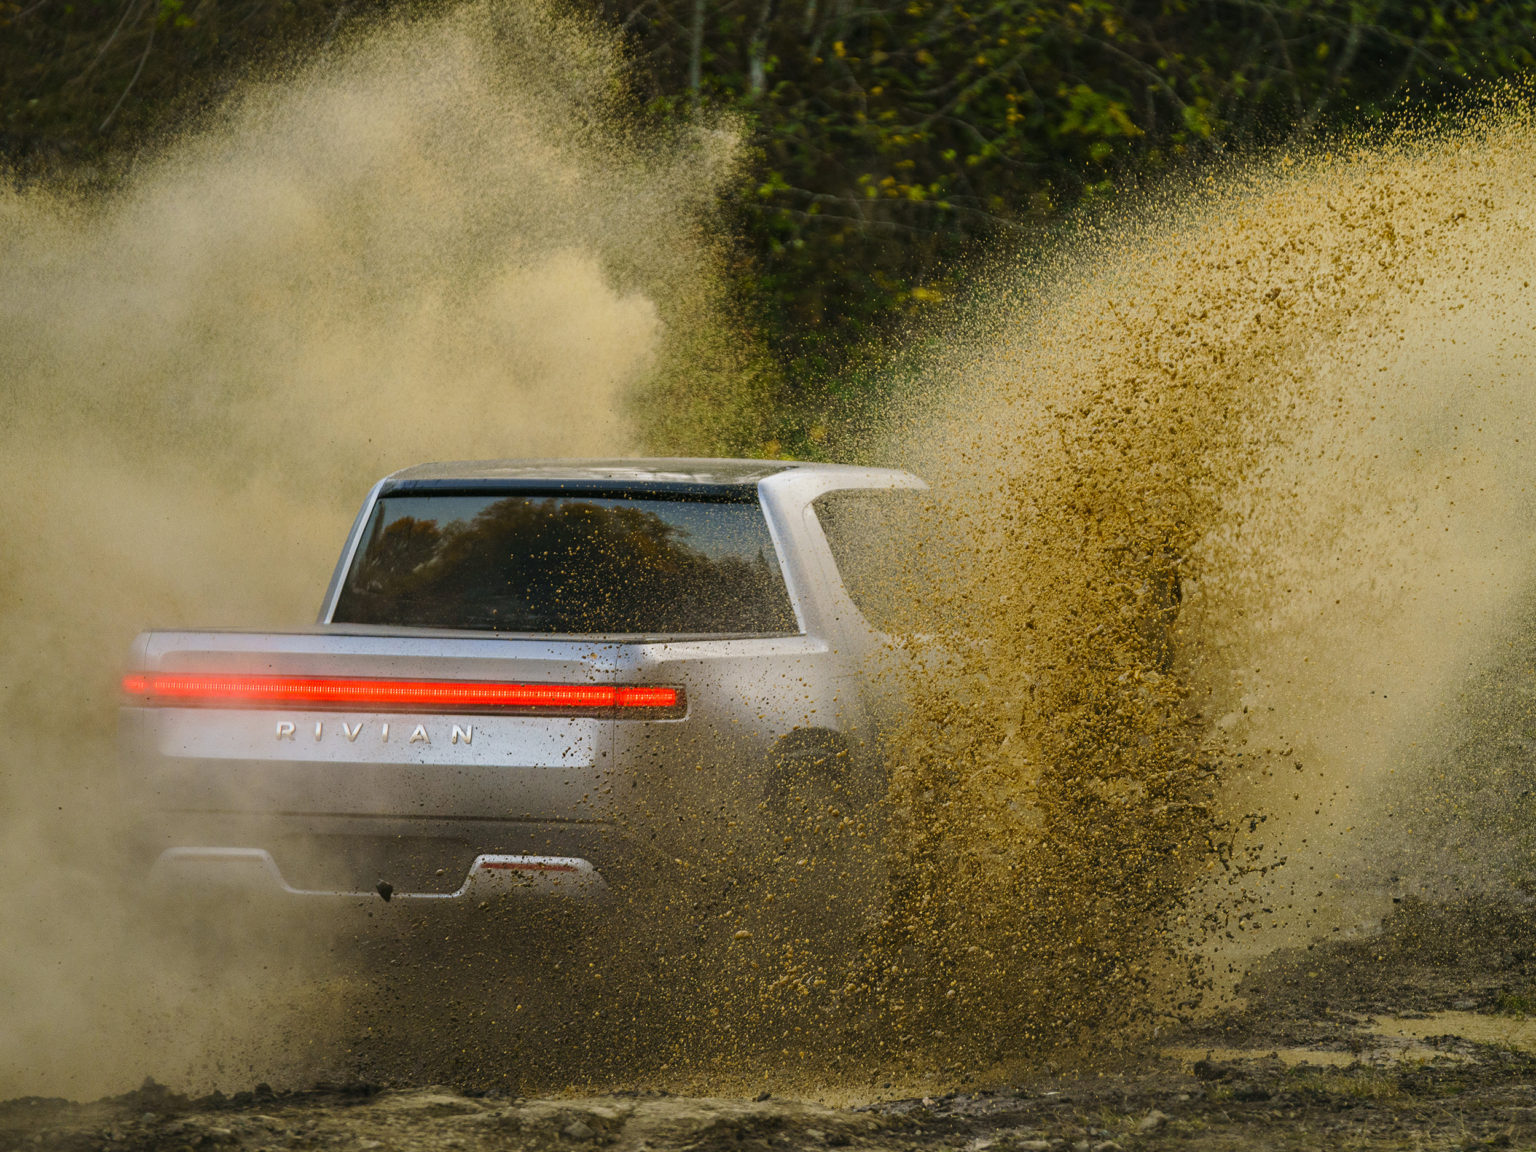 Rivian showed off its truck's capability in an early morning tweet.